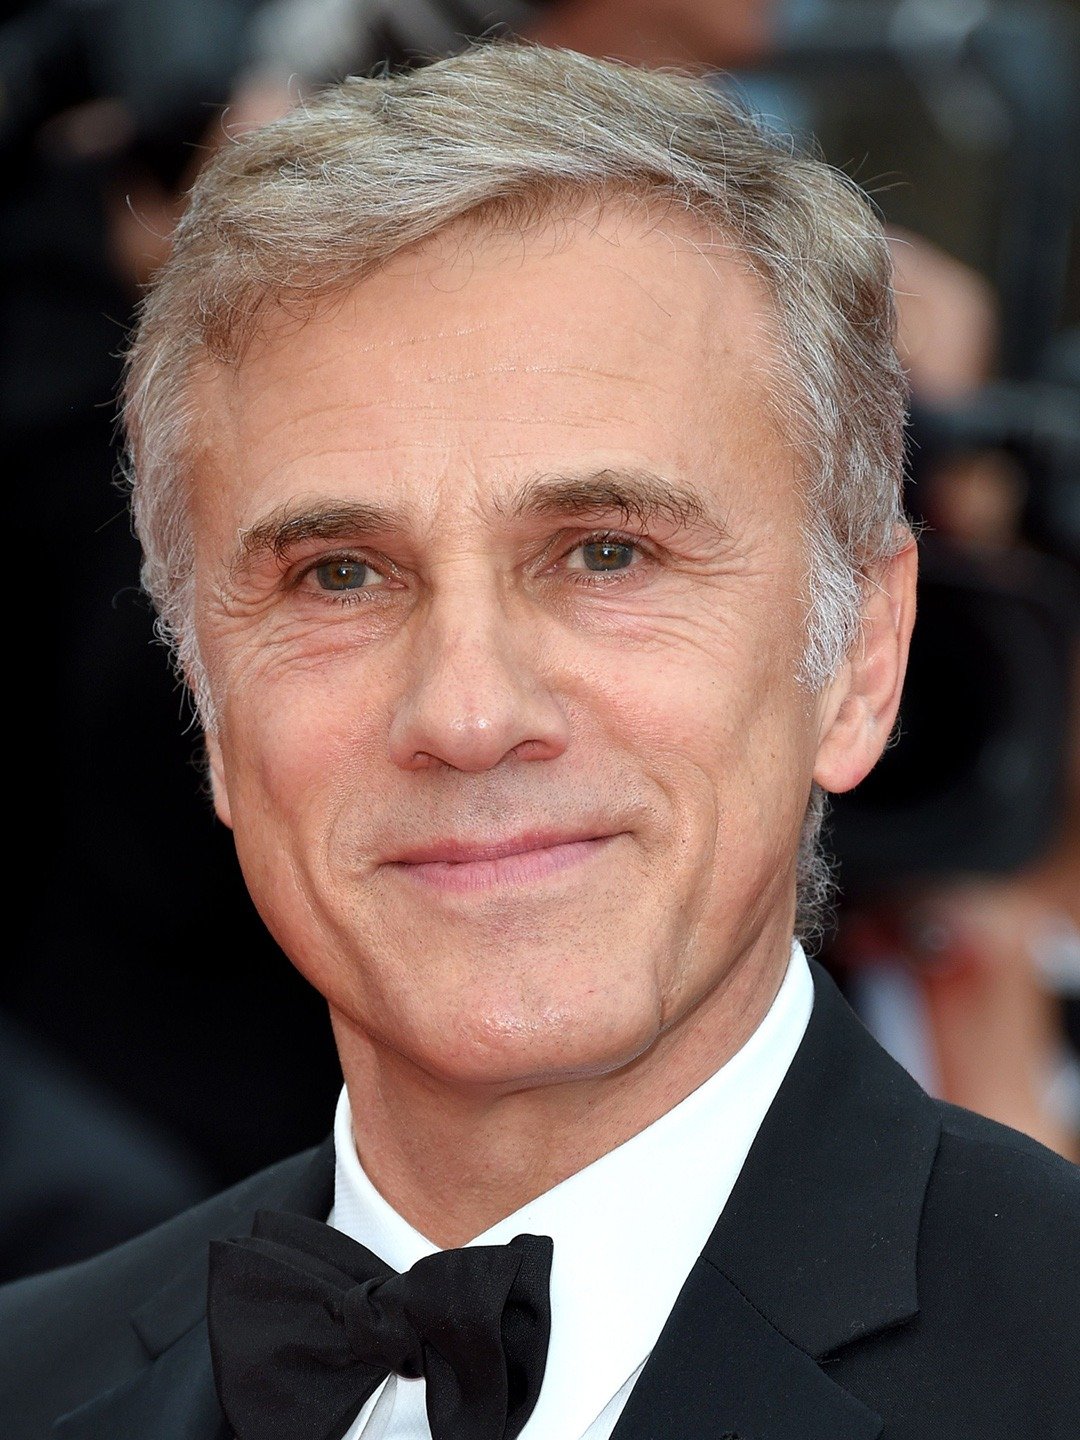 How tall is Christoph Waltz?